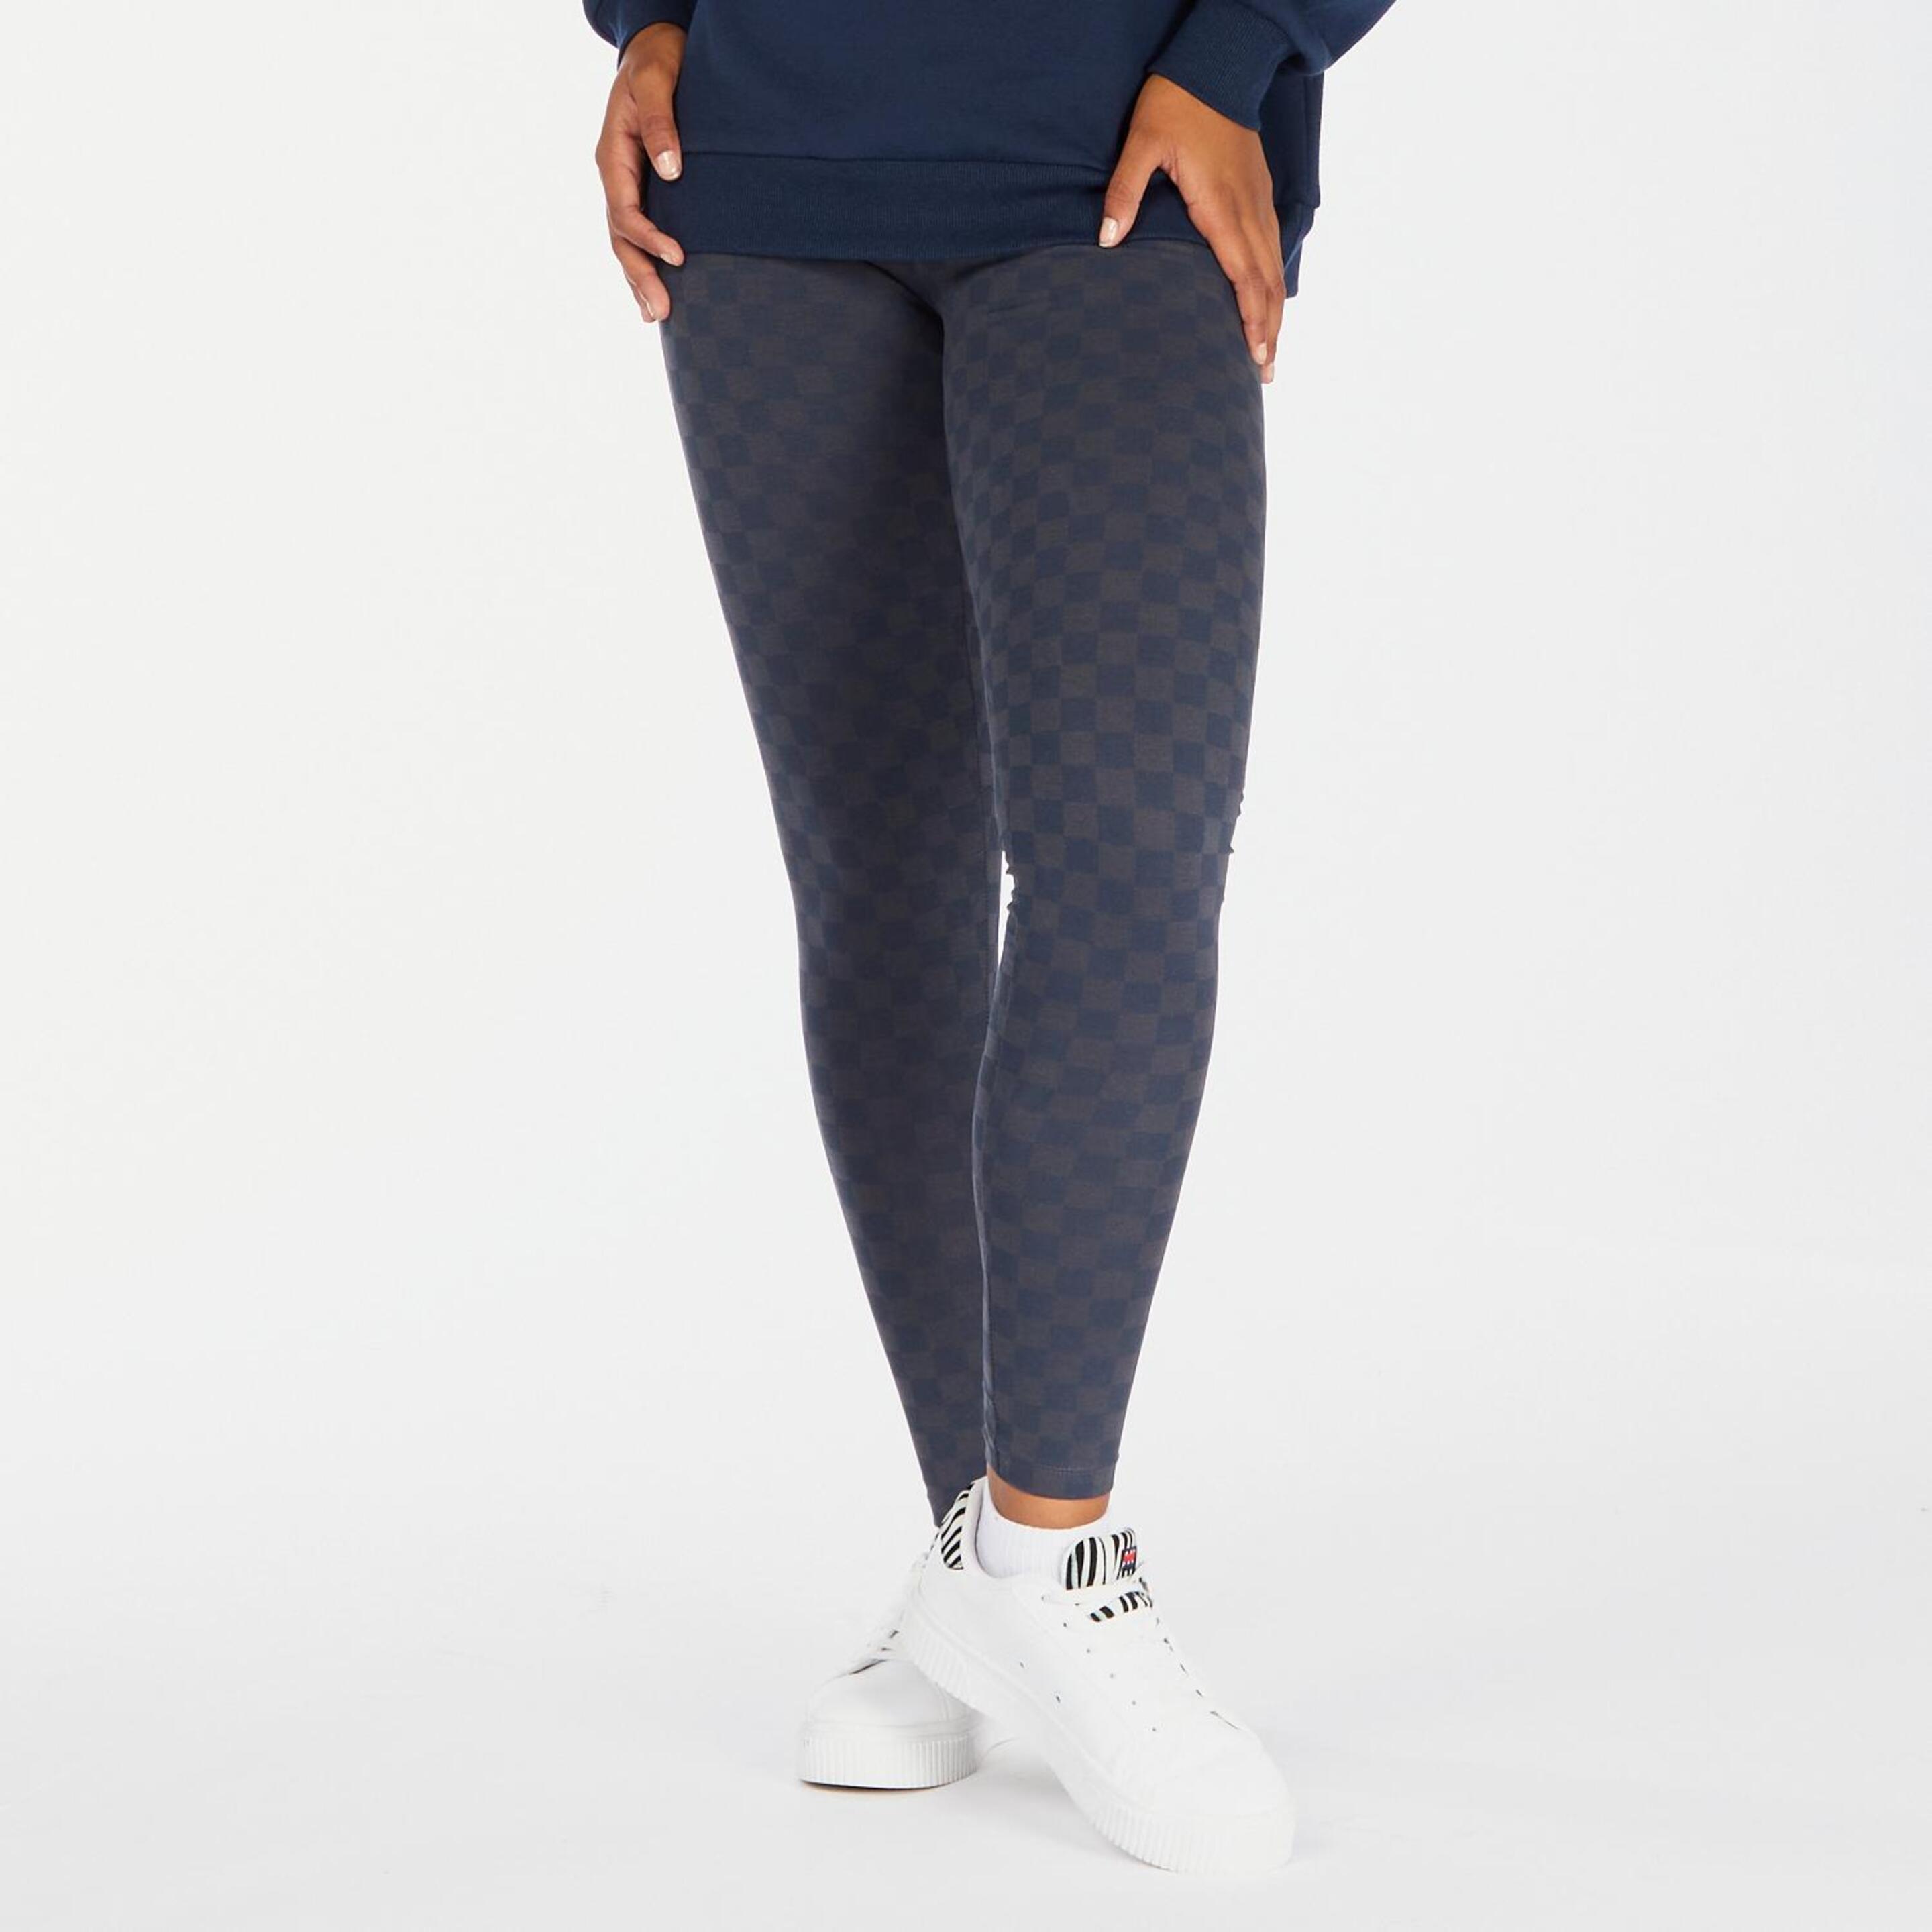 Up Stamps - gris - Leggings Mujer